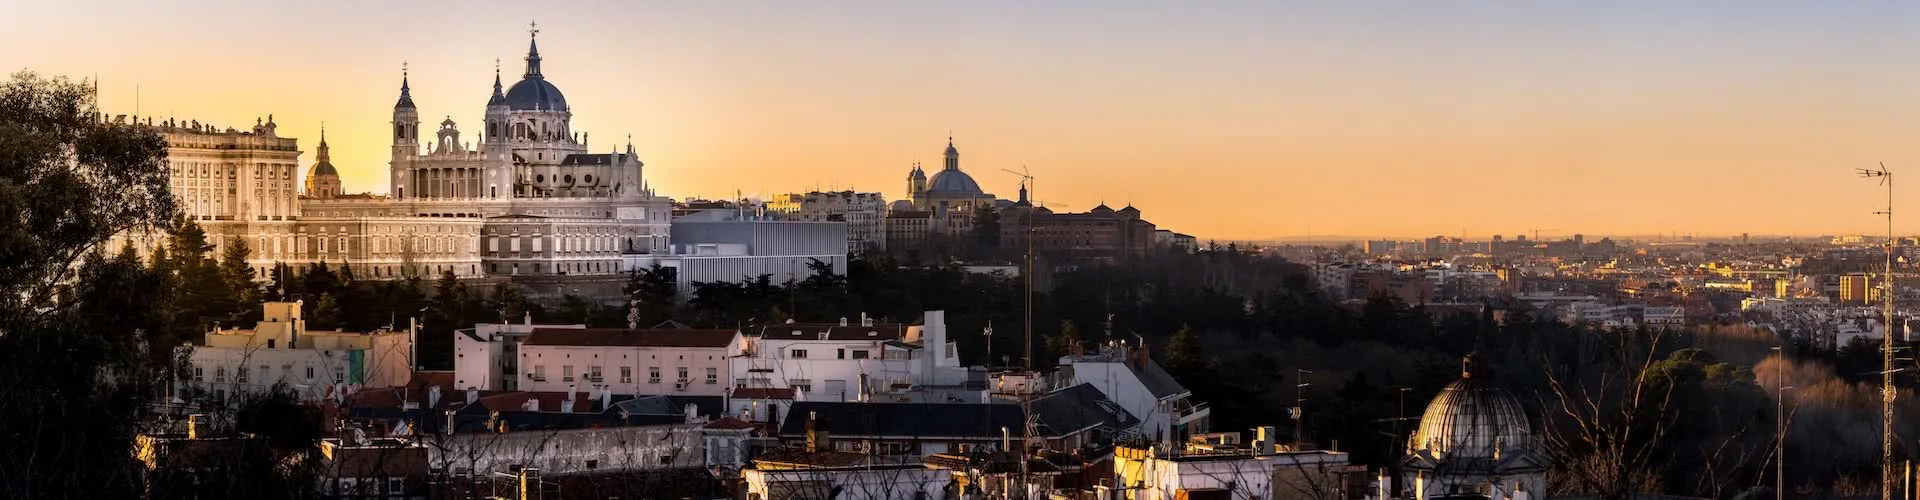 Madrid - the destination for exhibition hotels